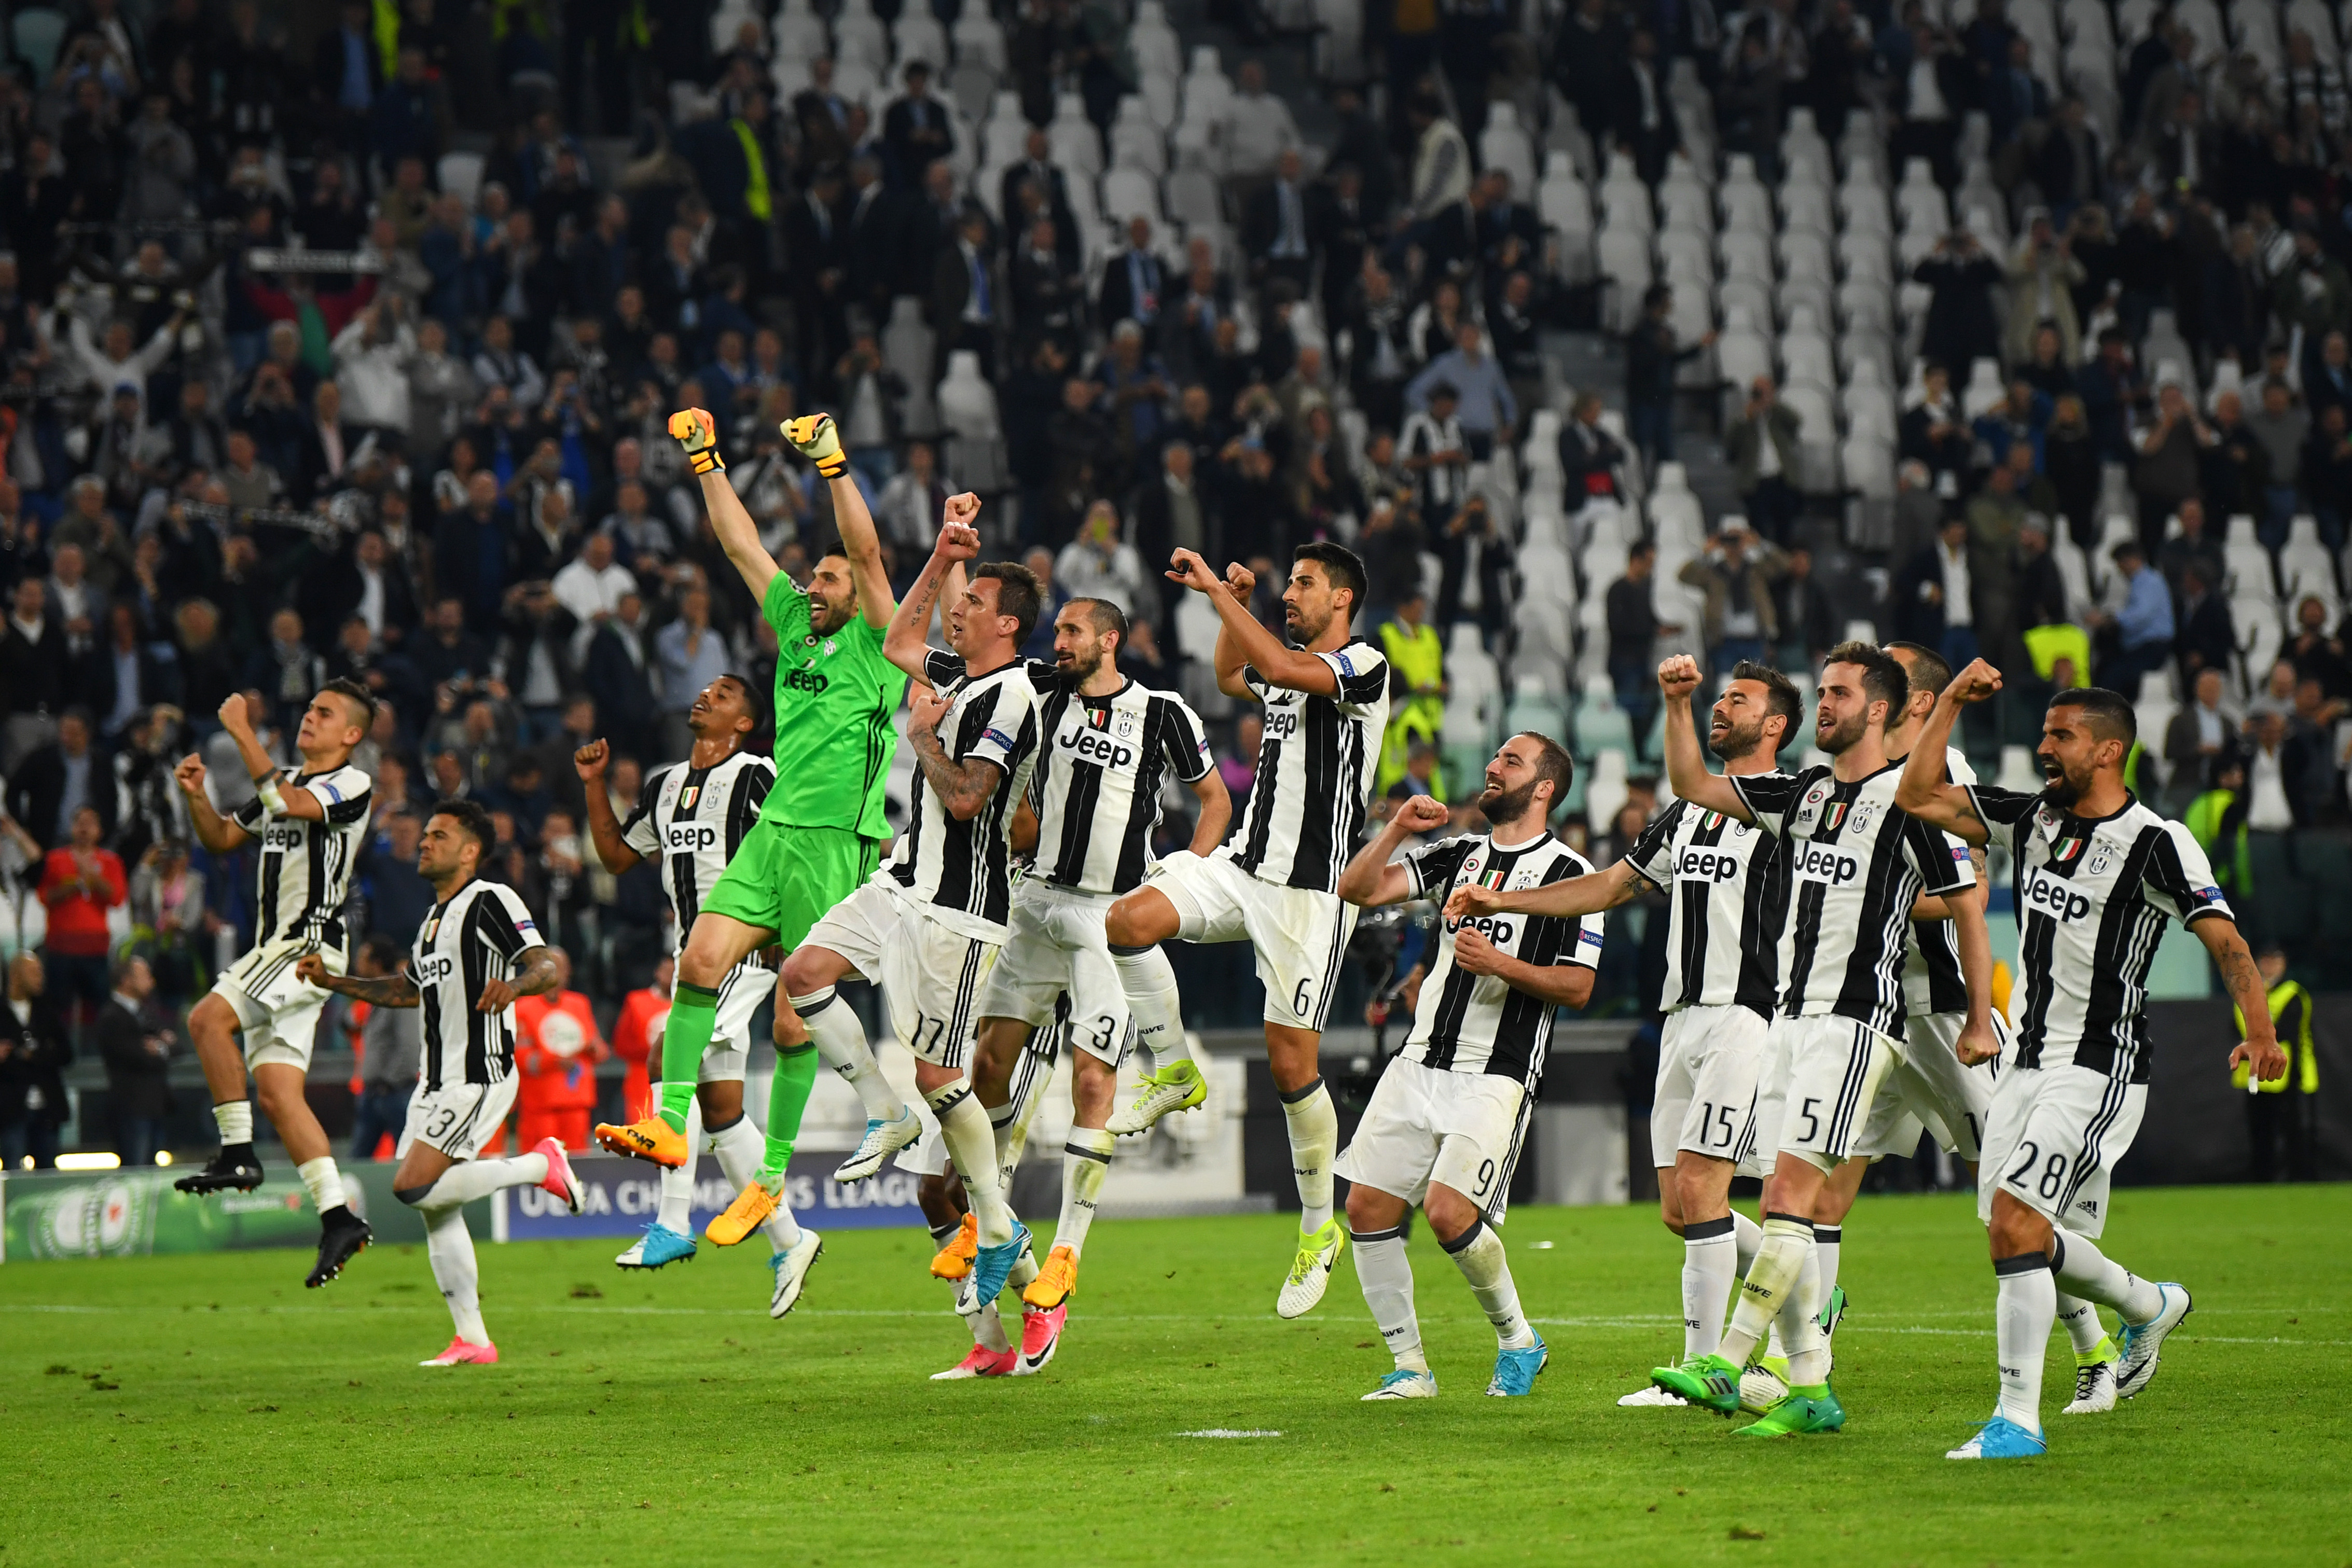 TURIN, ITALY - APRIL 11:  Juventus players celebrate after the UEFA Champions League Quarter Final first leg match between Juventus and FC Barcelona at Juventus Stadium on April 11, 2017 in Turin, Italy.  (Photo by Mike Hewitt/Getty Images)